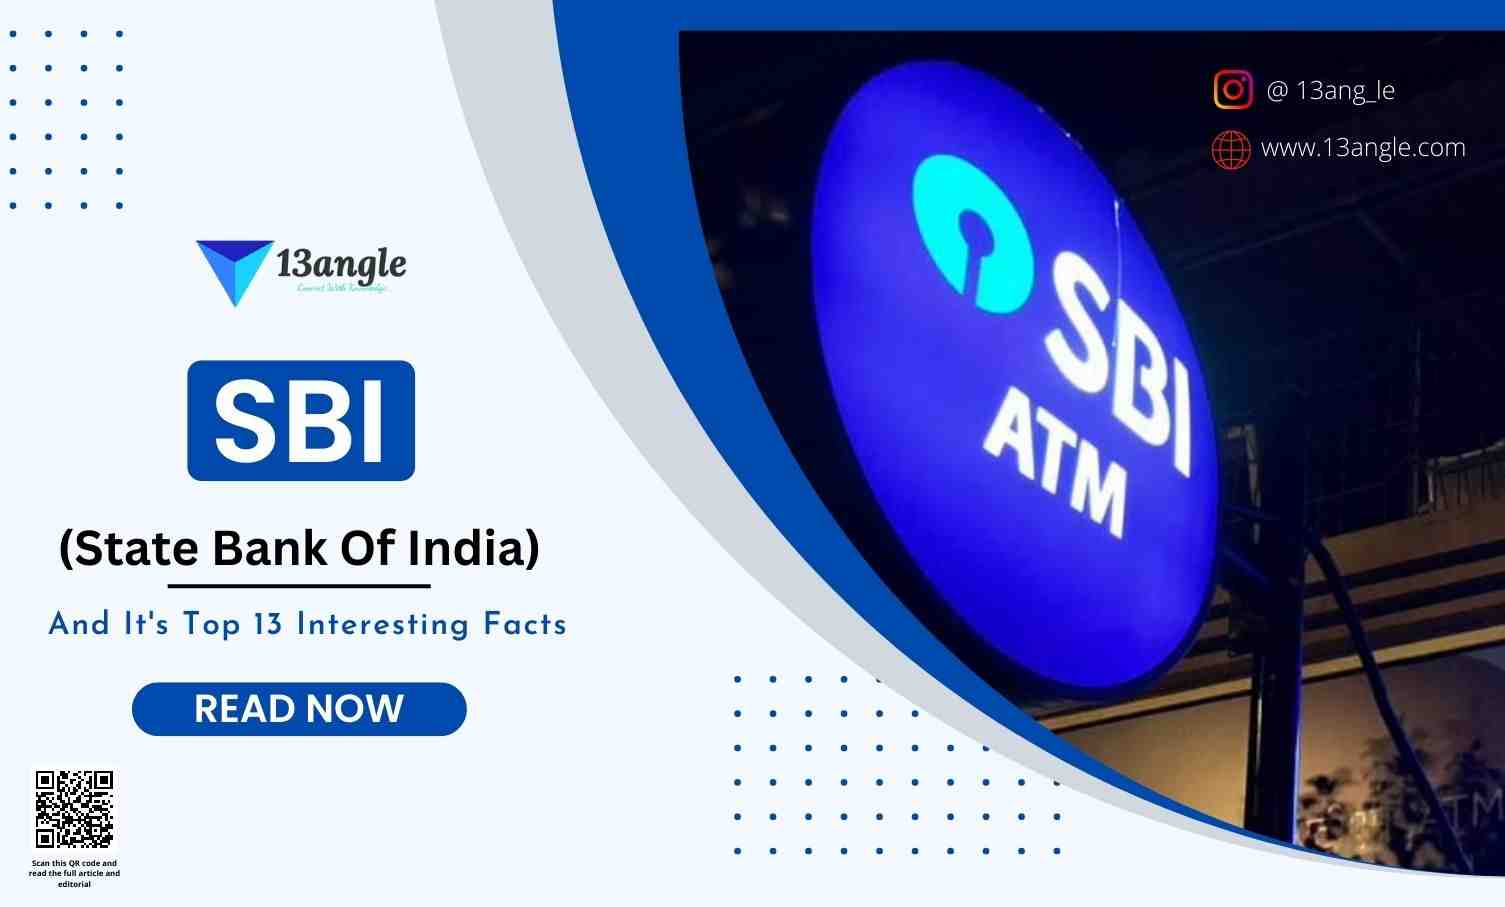 Sbi State Bank Of India And Its 13 Interesting Facts History Evolution Shares Objectives 7278